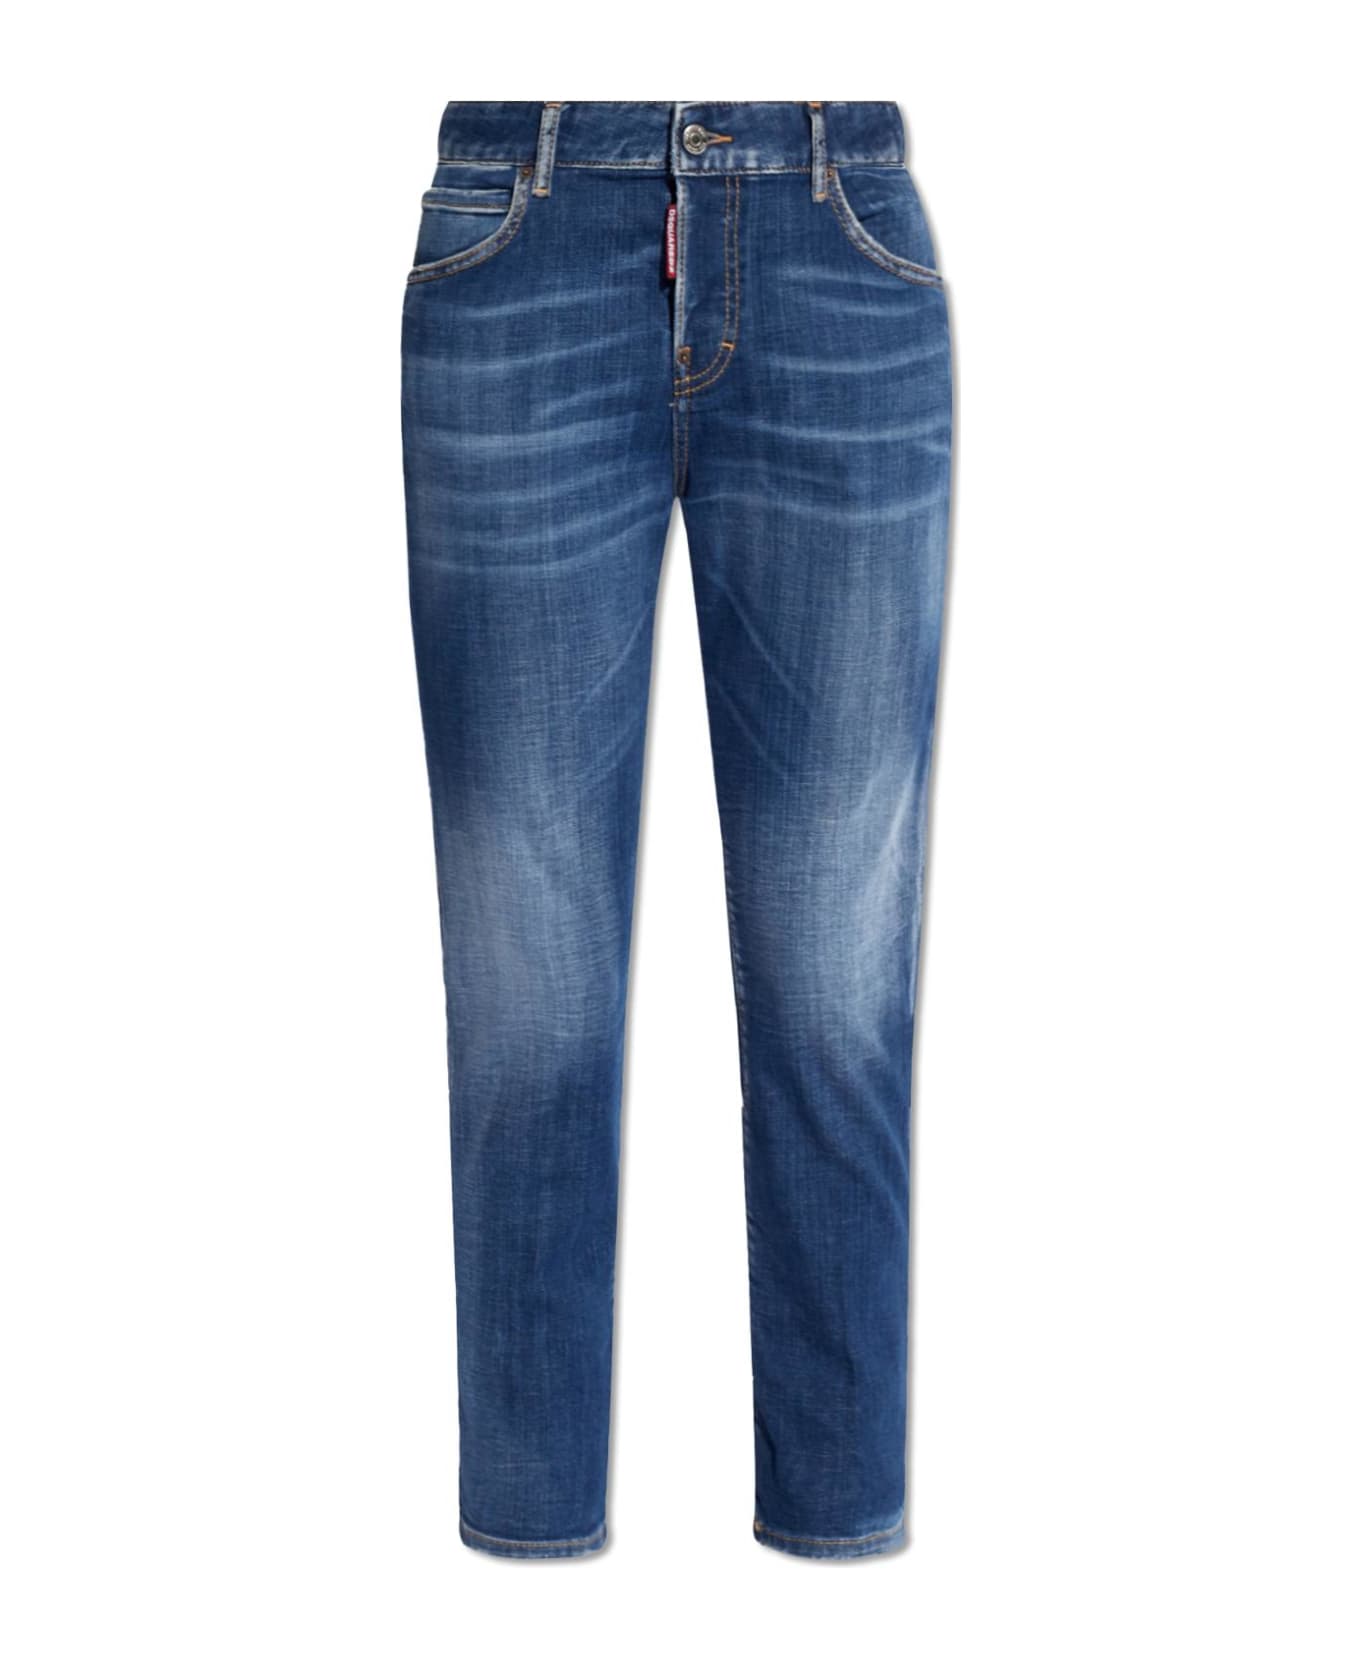 Dsquared2 'cool Girl' Jeans - NAVY BLUE